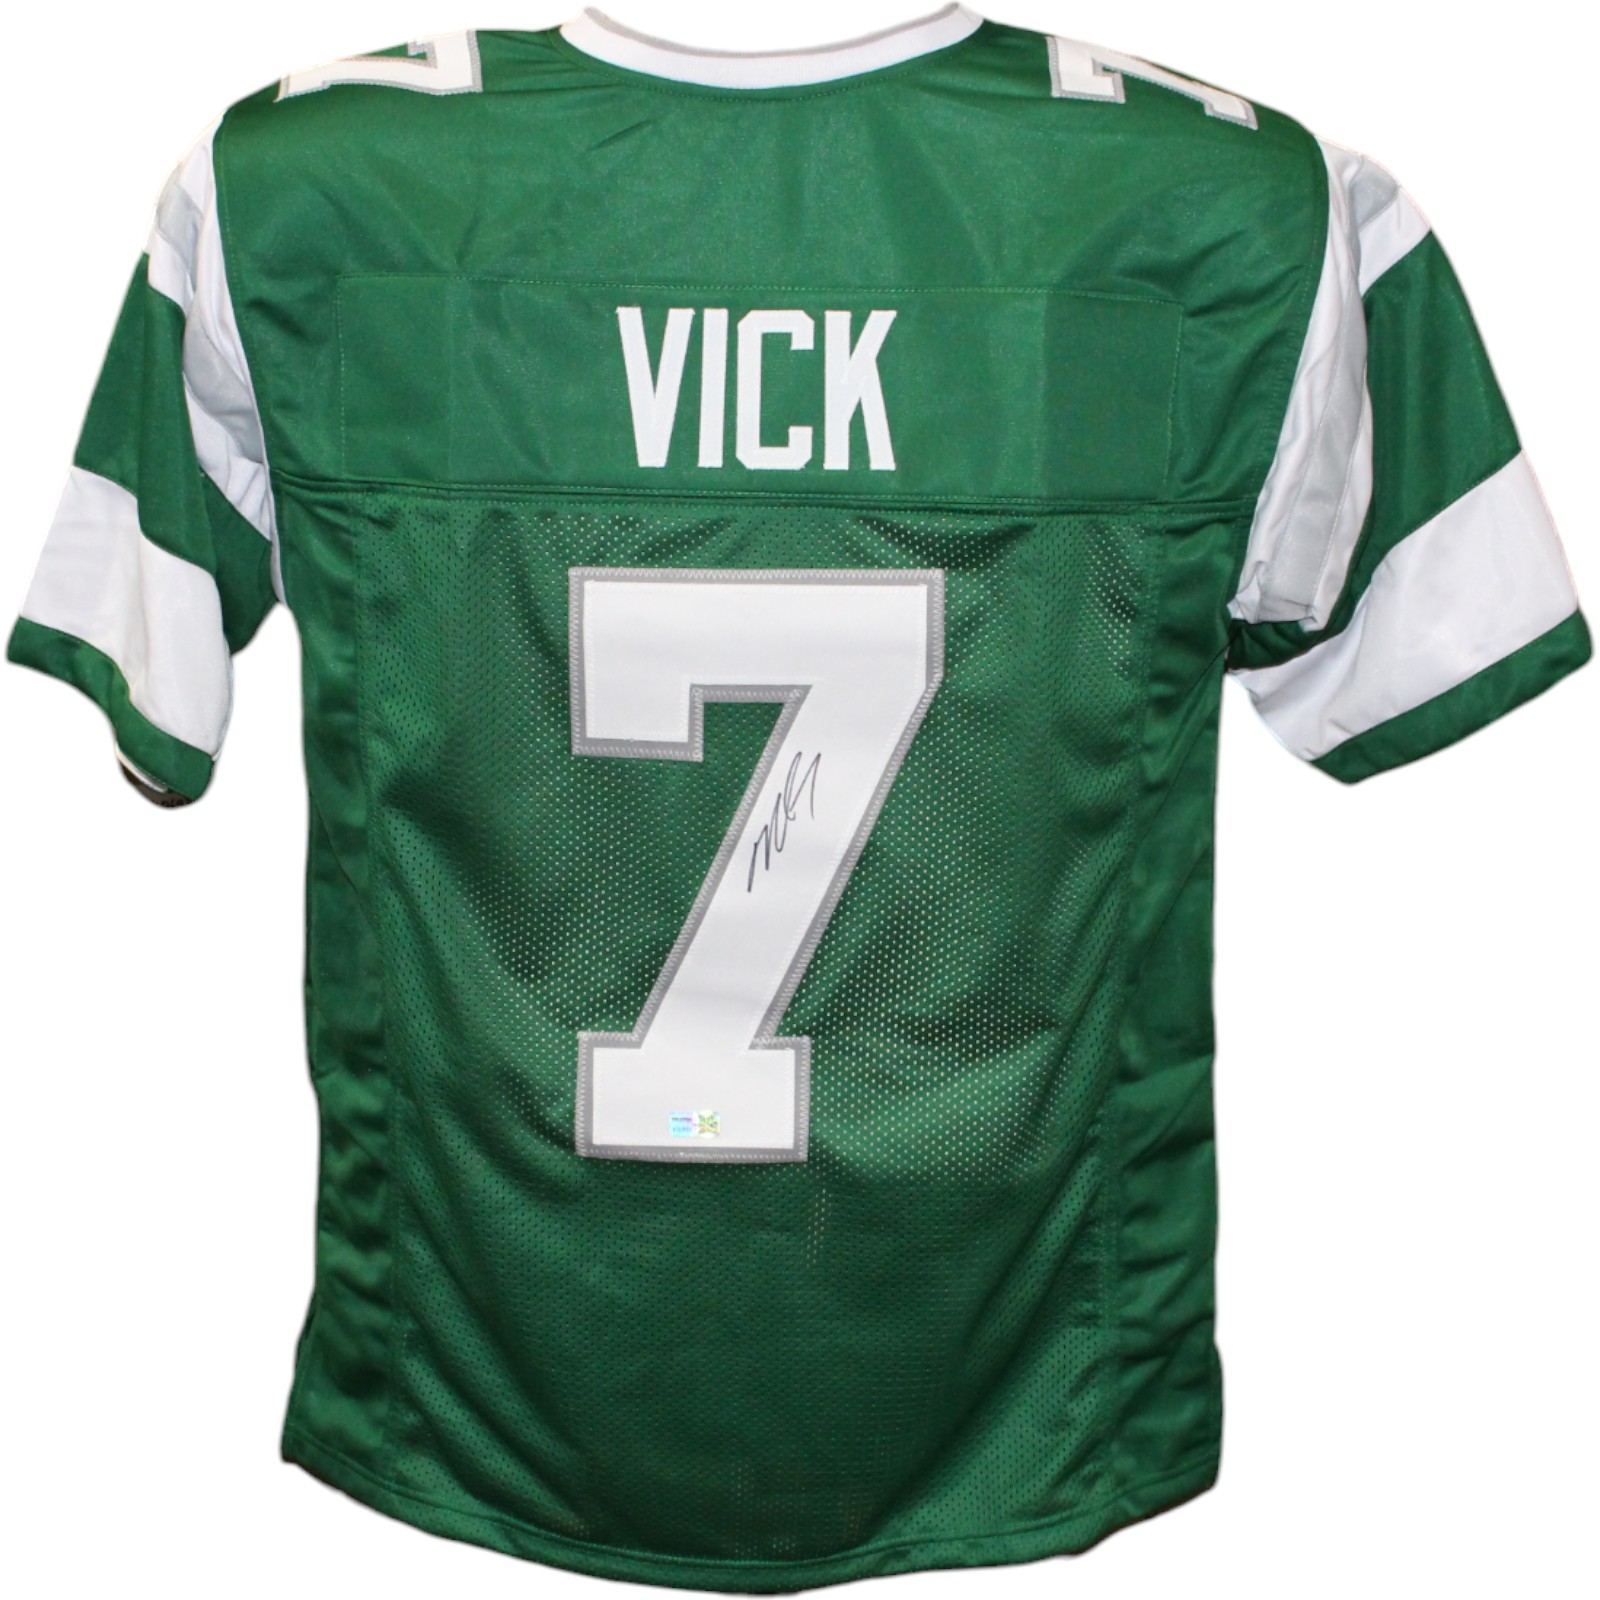 Michael Vick Autographed/Signed Pro Style Green Jersey TRI